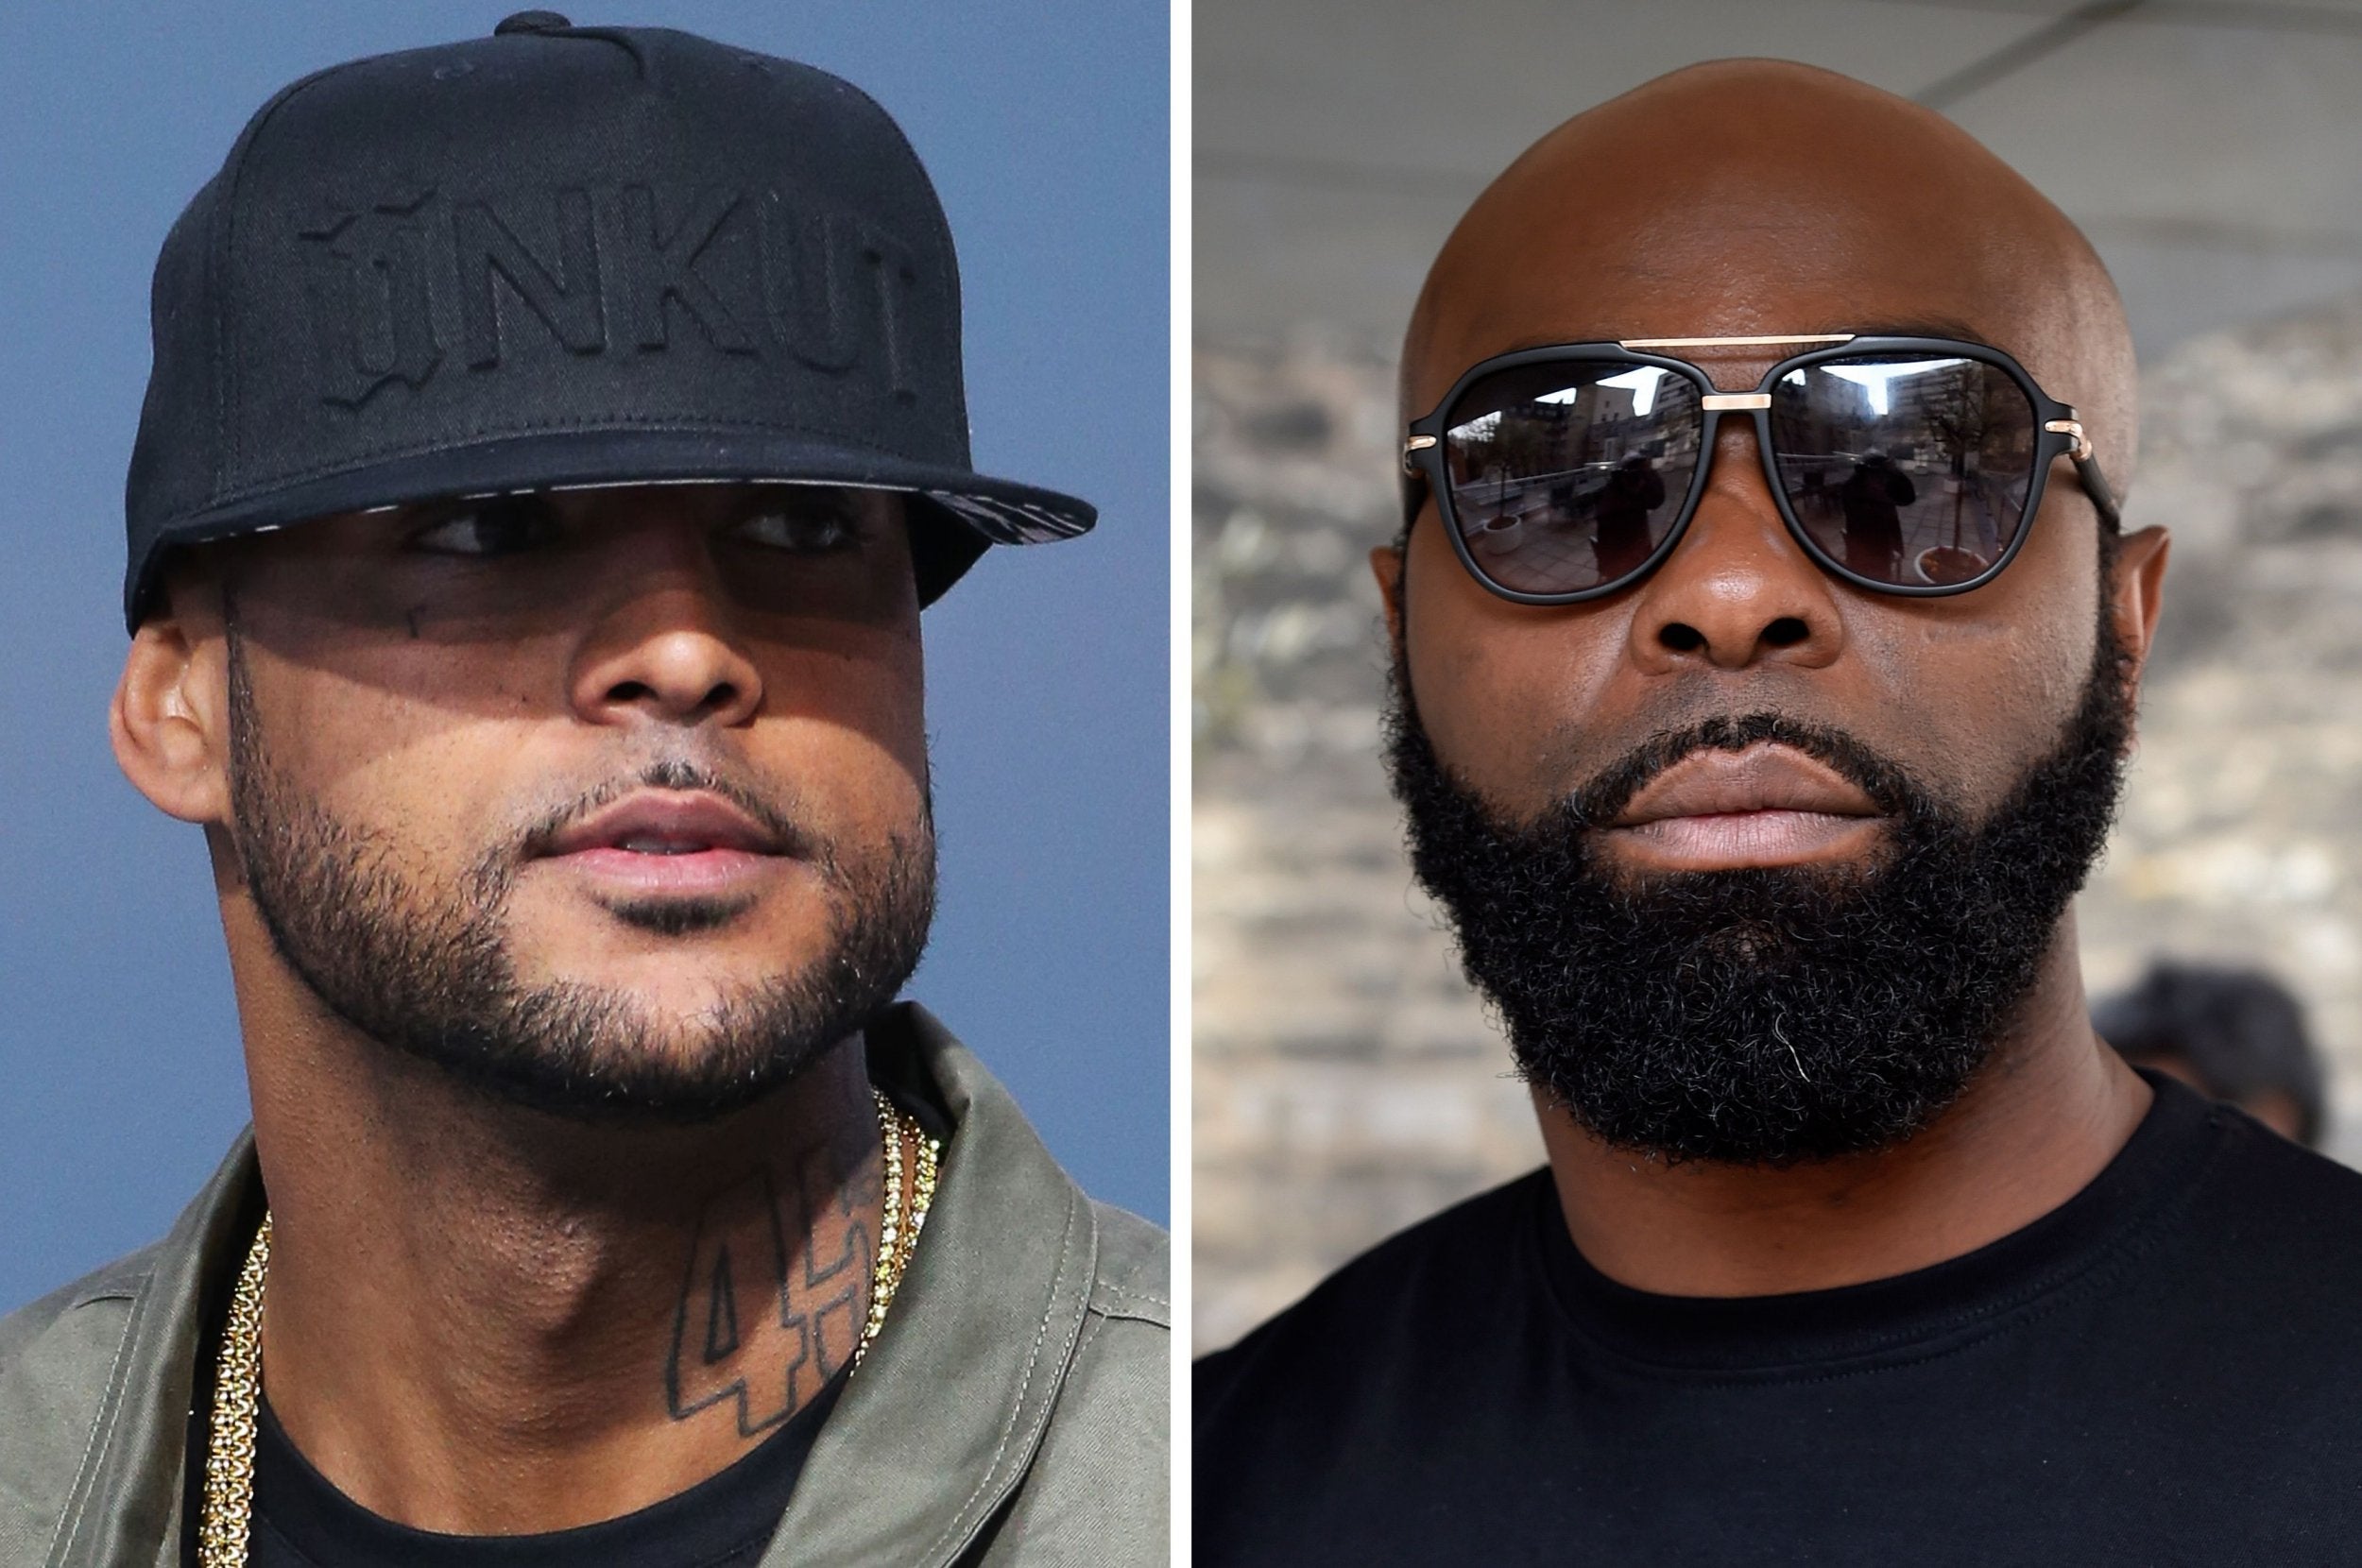 French rapper Booba (left) and Kaaris (right) have been handed suspended sentences over a brawl at Orly airport on 1 August